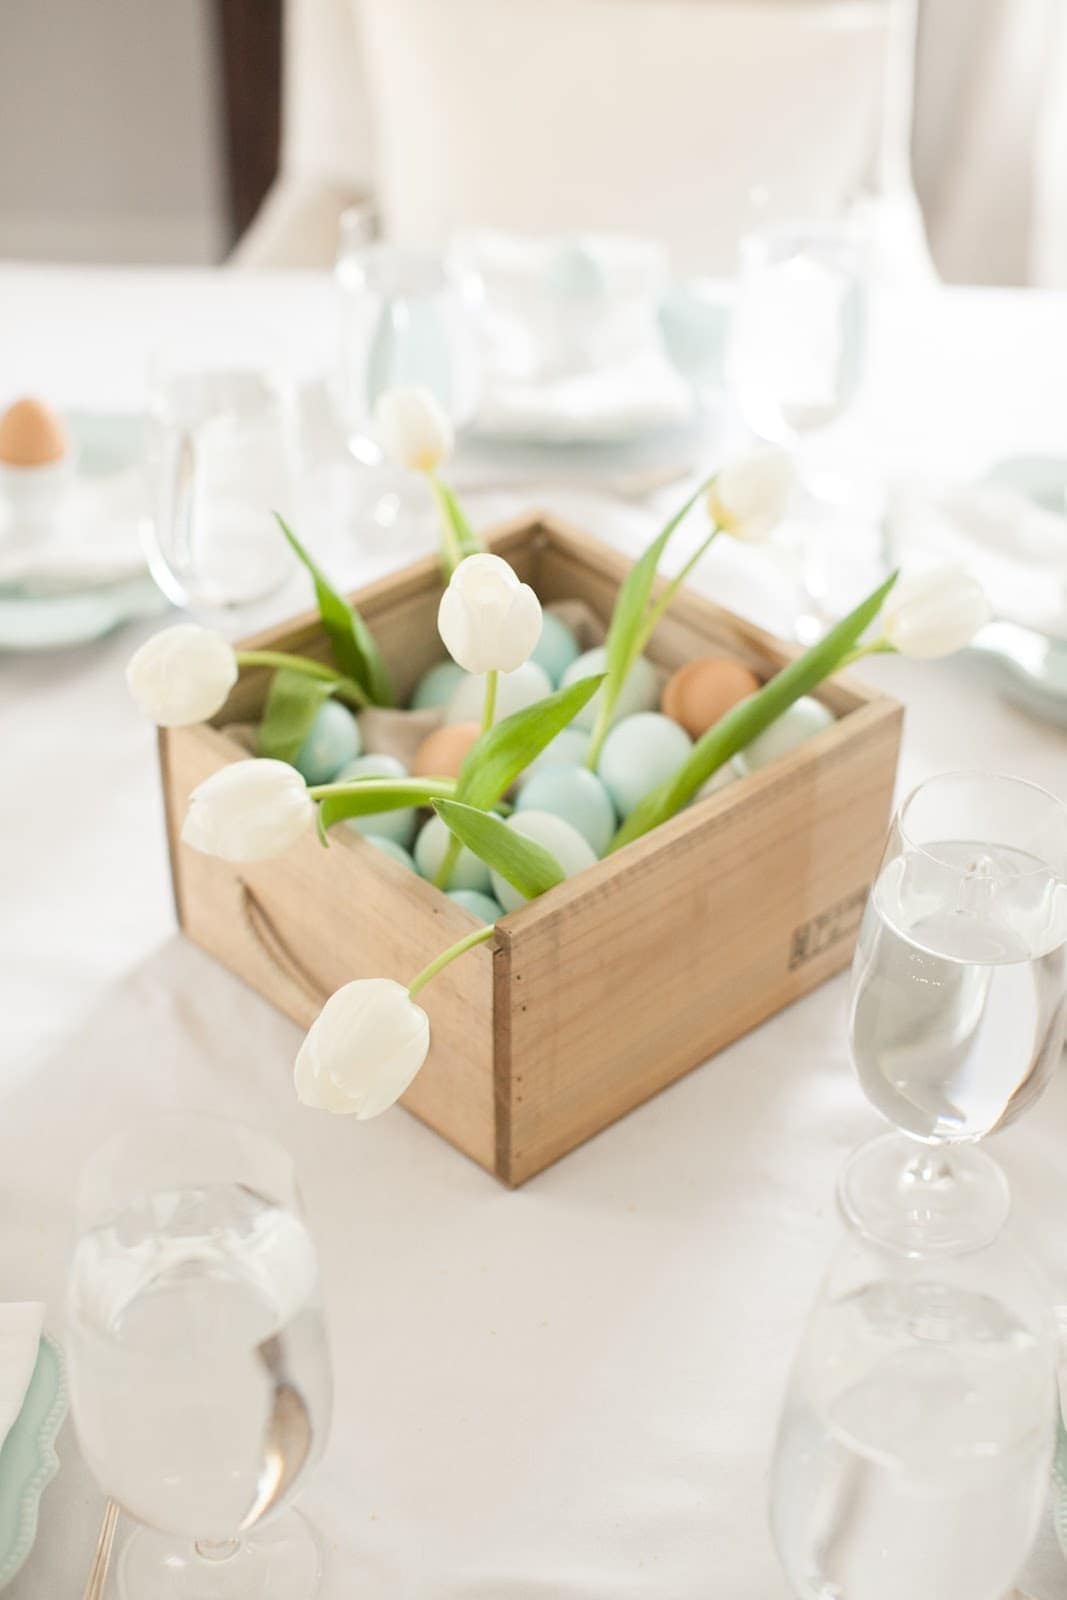 A wooden box filled with easter eggs in the center of Easter table decor